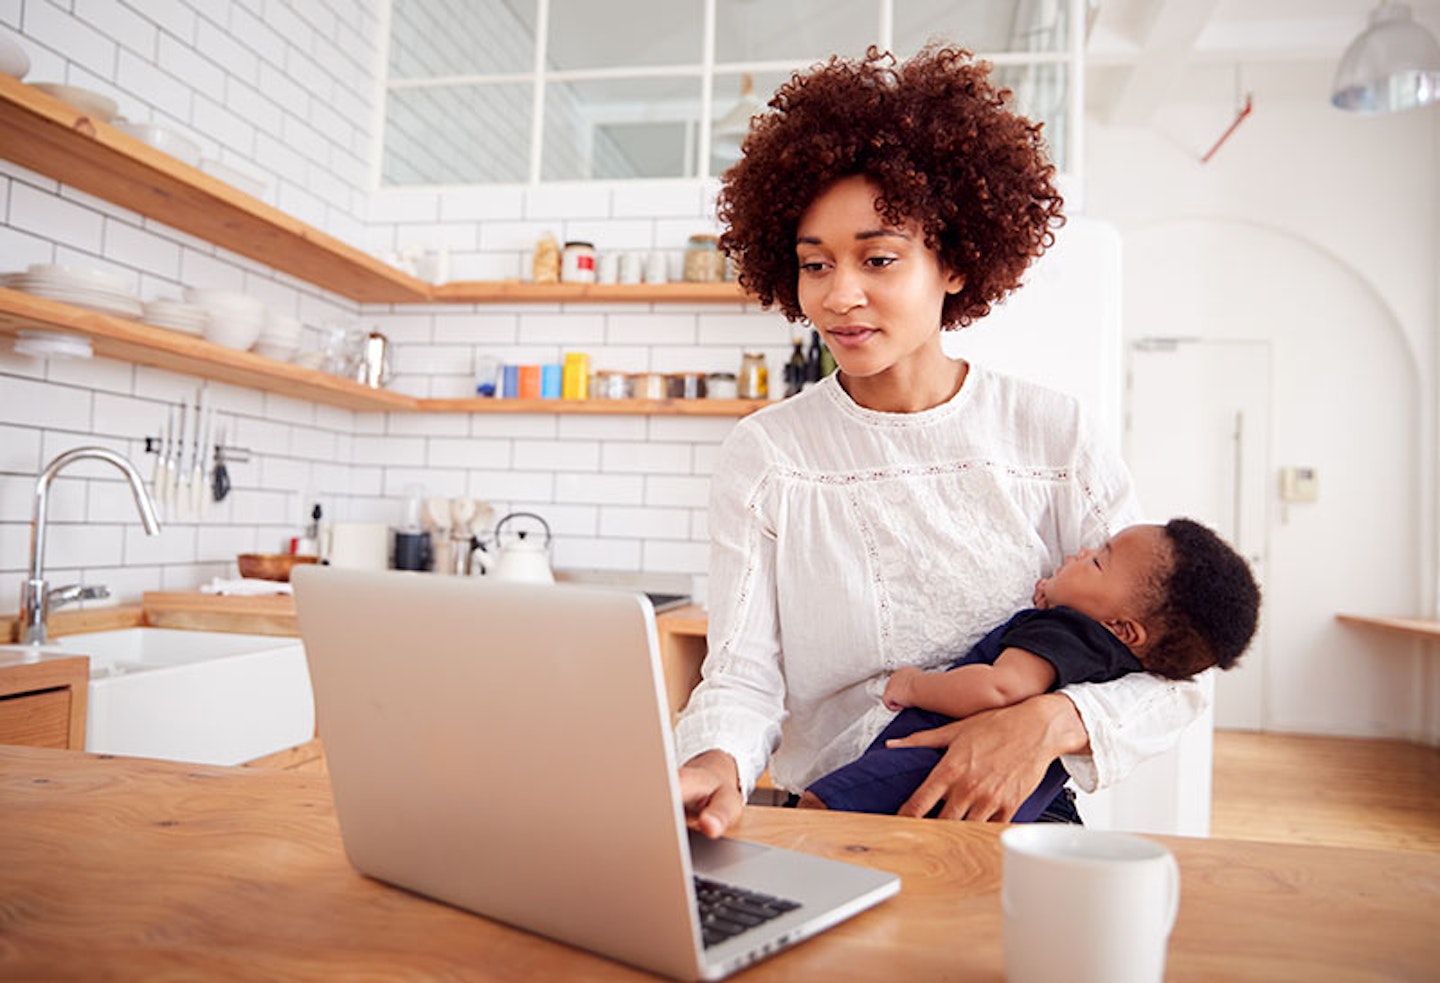 7 ways to boost your career during maternity leave